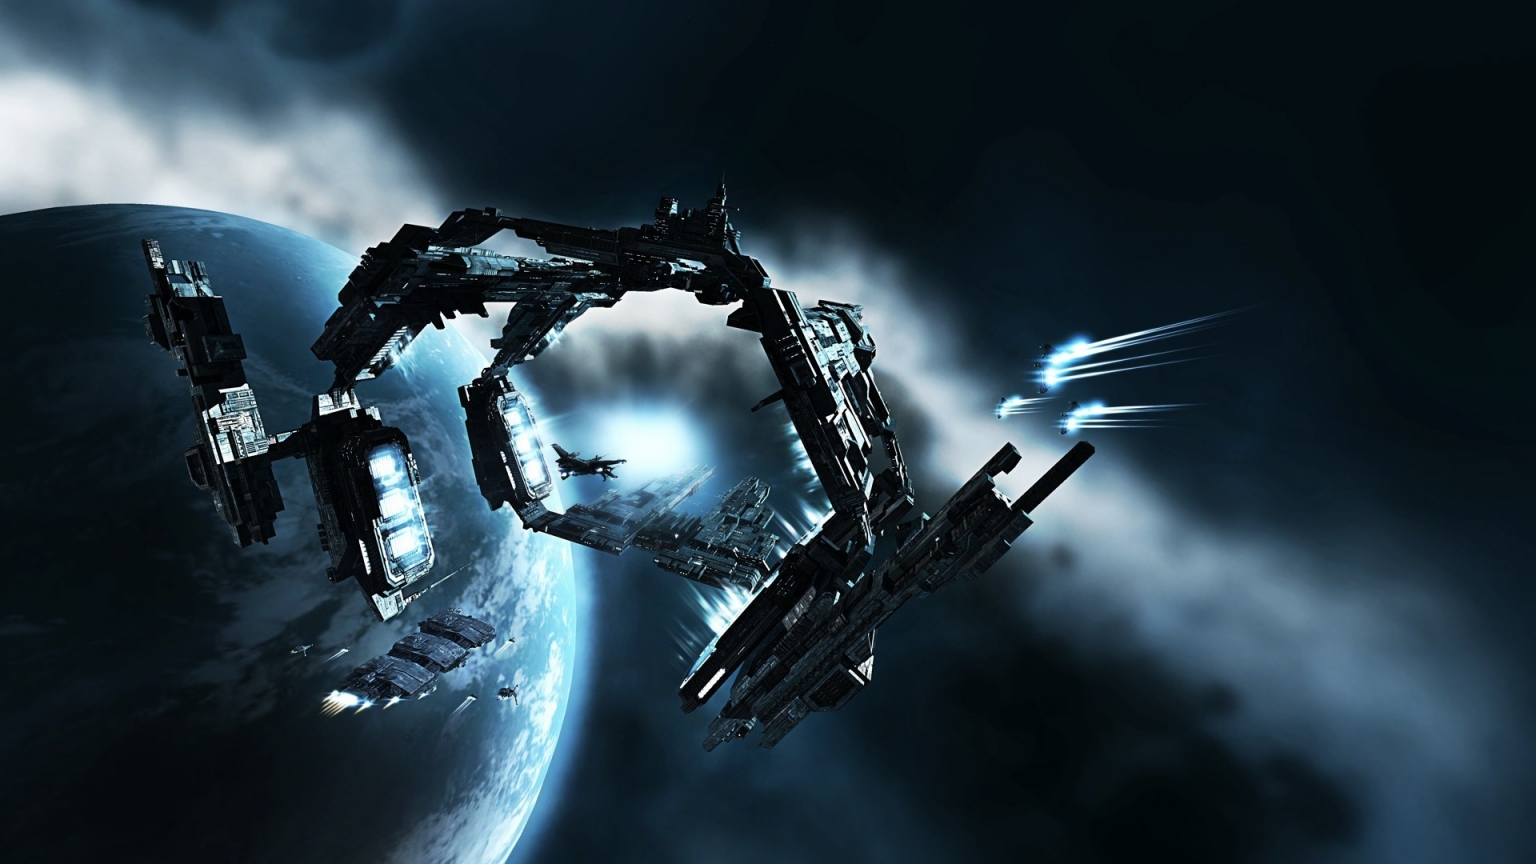 Eve Space Station for 1536 x 864 HDTV resolution